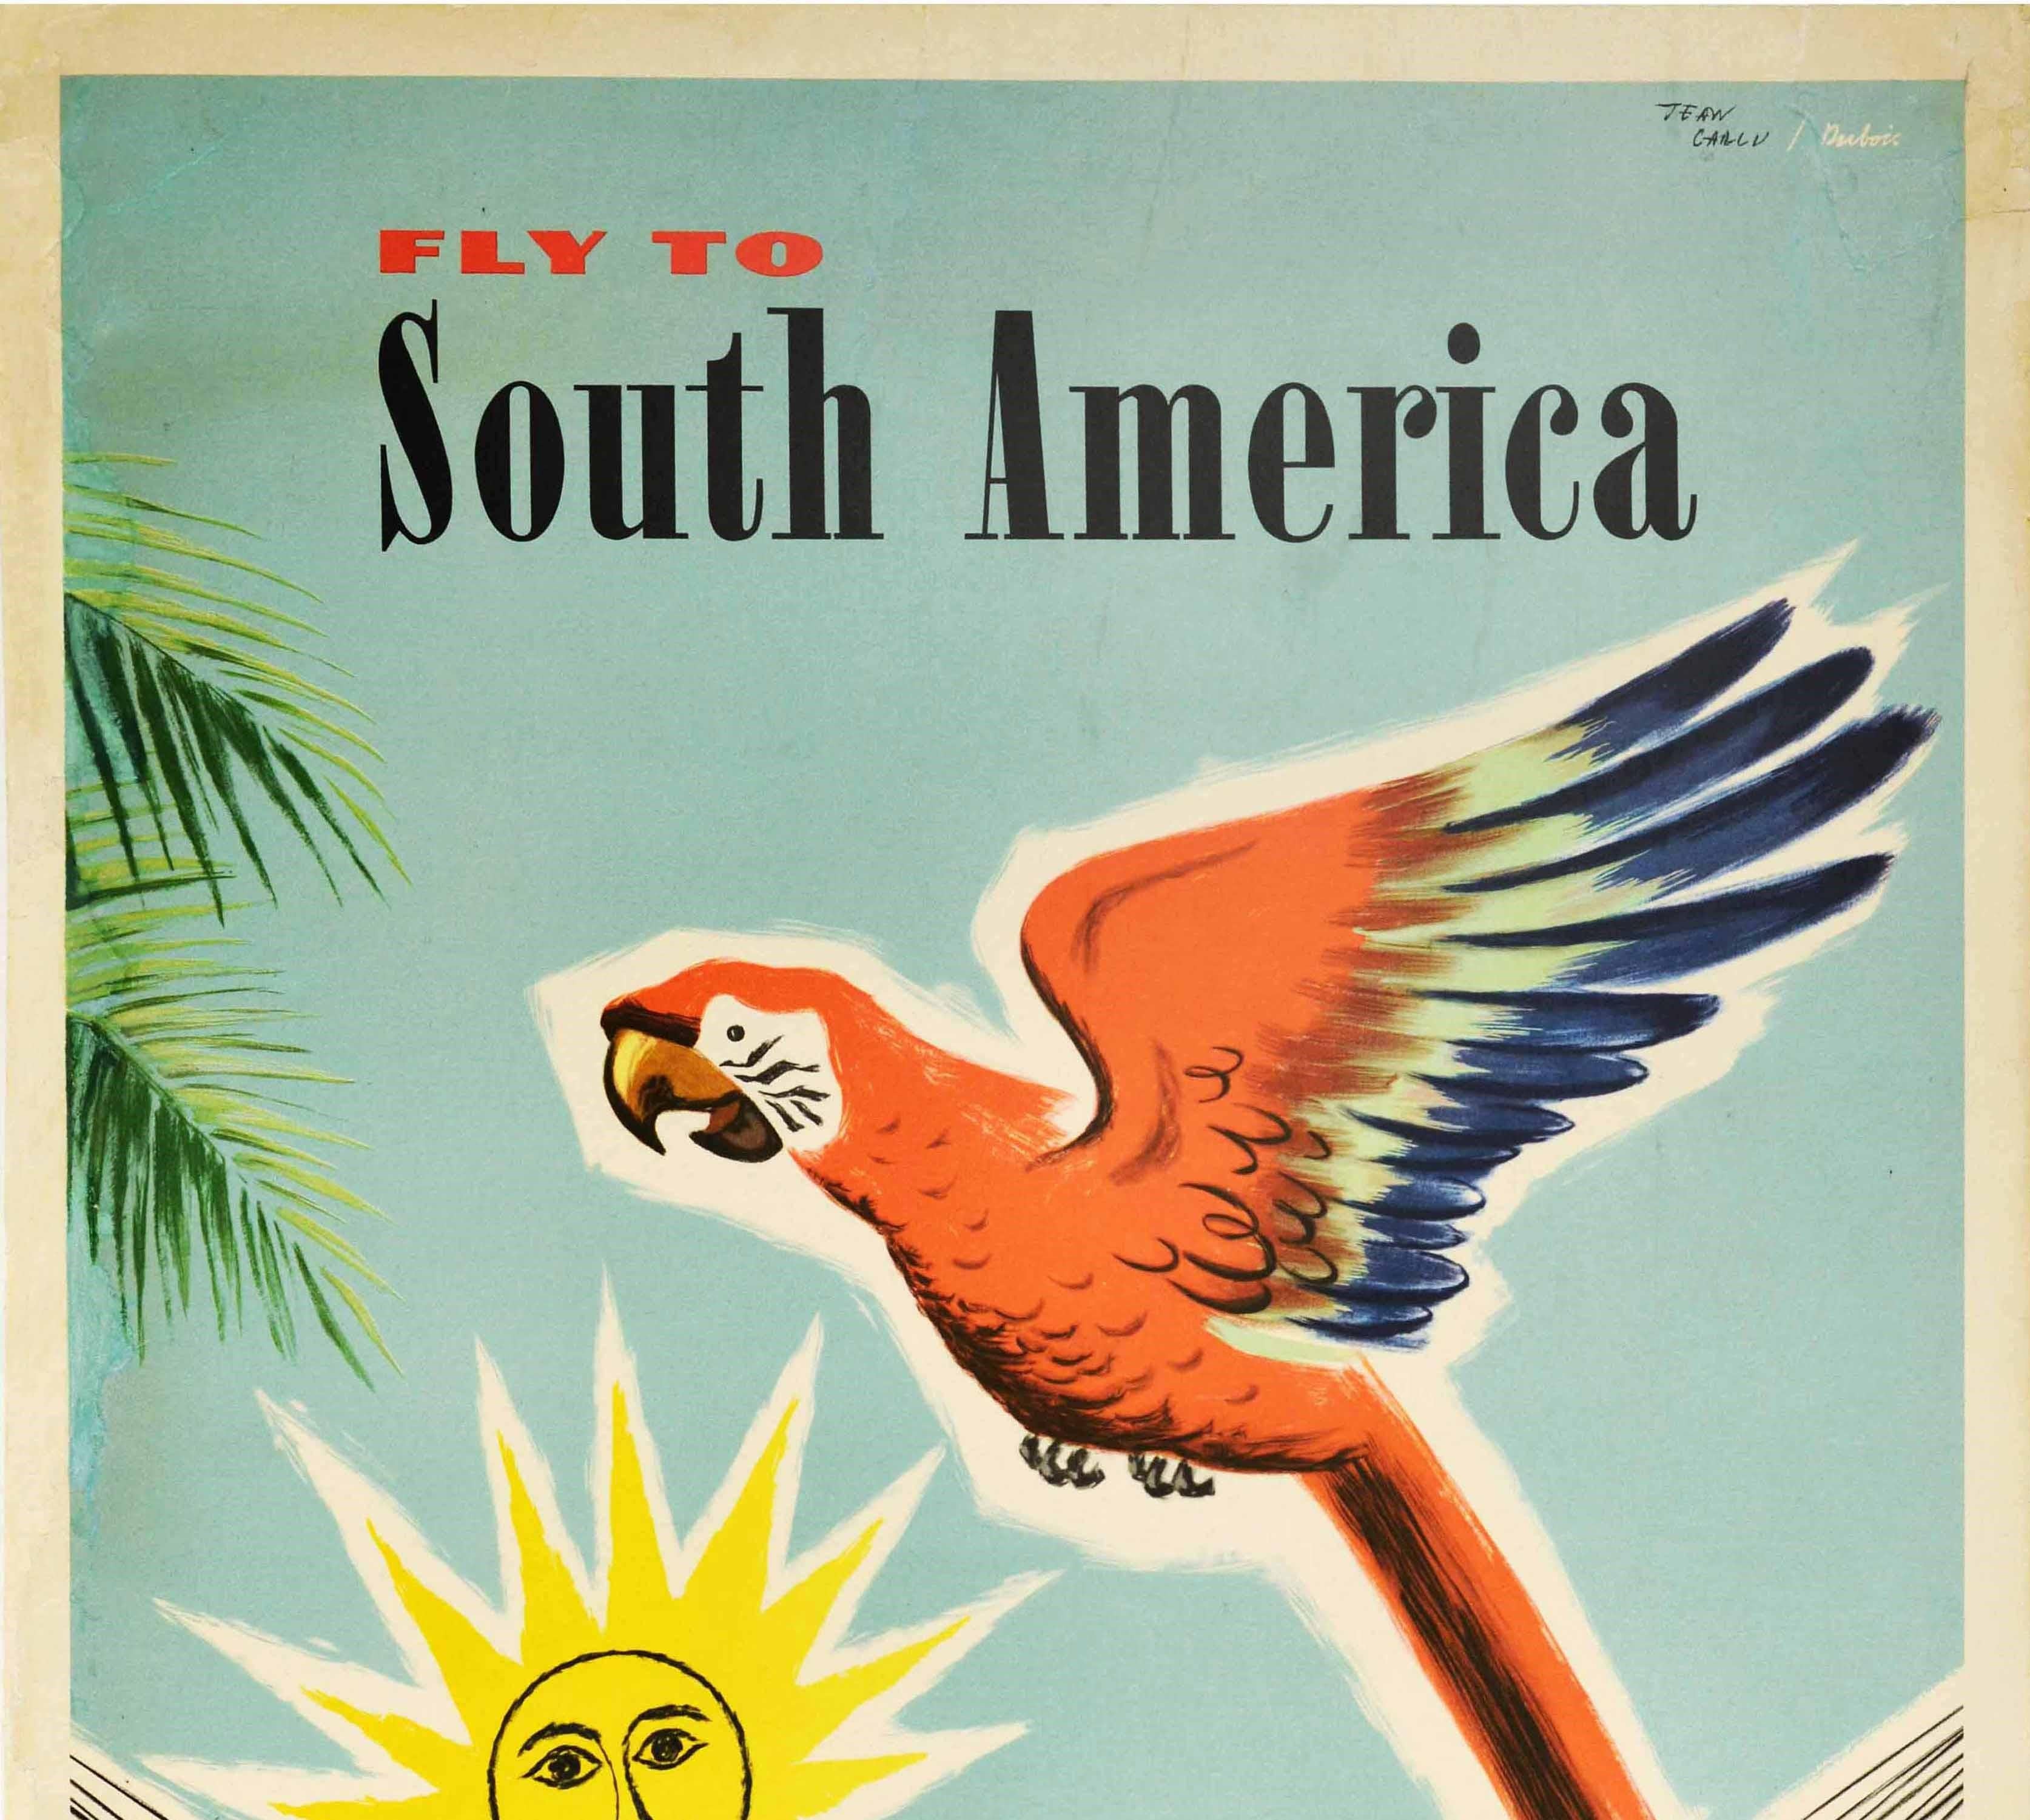 Original Vintage Poster Fly To South America Pan Am Air Travel Beach Parrot Sun - Print by Jean Carlu and Dubois